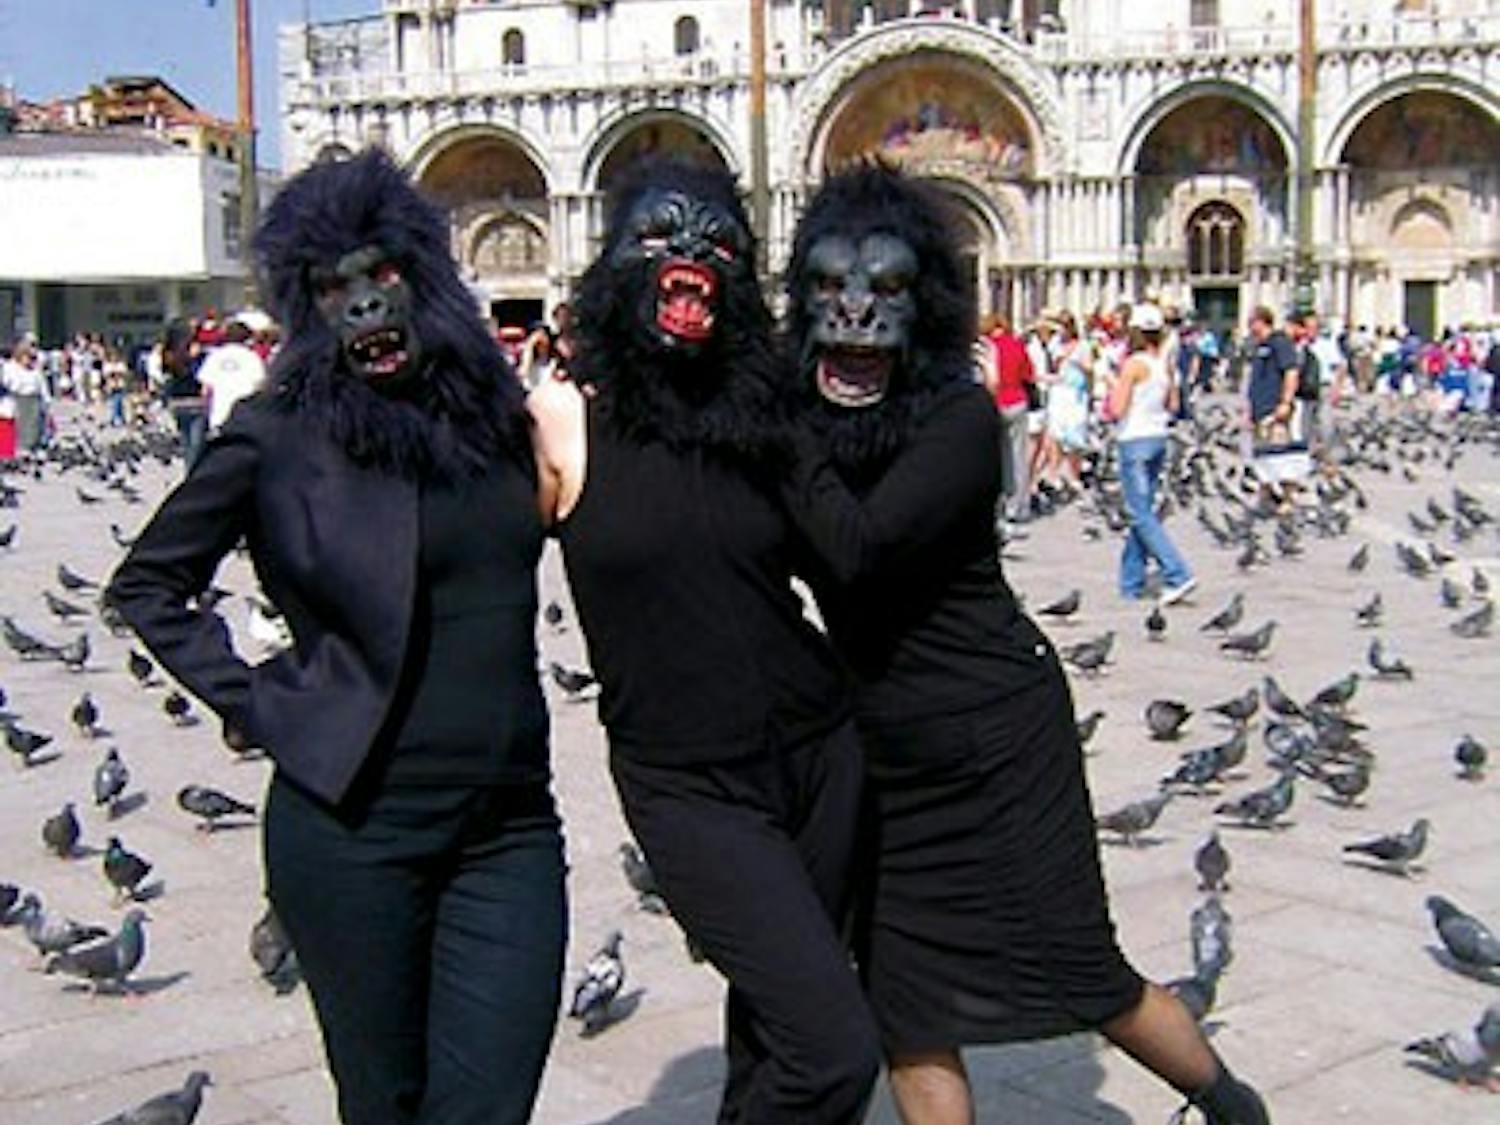 The Guerrilla Girls have performed in gorilla masks to raise awareness about feminist issues for more than 20 years. They will be at the KiMo Theatre on Friday night. 